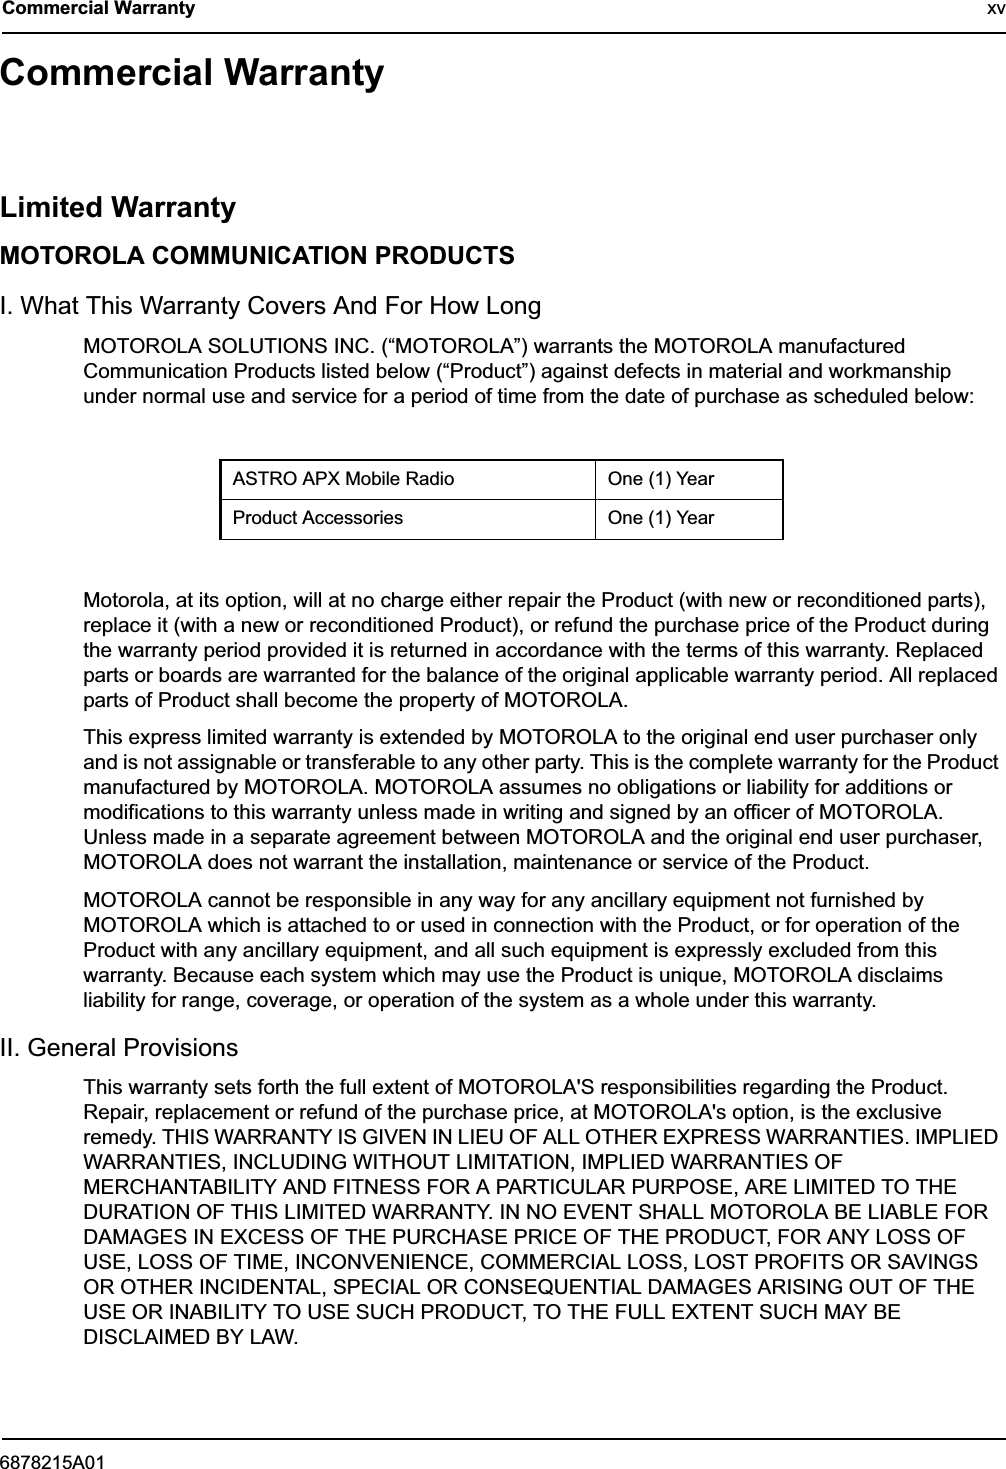 6878215A01Commercial Warranty xvCommercial WarrantyLimited WarrantyMOTOROLA COMMUNICATION PRODUCTSI. What This Warranty Covers And For How LongMOTOROLA SOLUTIONS INC. (“MOTOROLA”) warrants the MOTOROLA manufactured Communication Products listed below (“Product”) against defects in material and workmanship under normal use and service for a period of time from the date of purchase as scheduled below:Motorola, at its option, will at no charge either repair the Product (with new or reconditioned parts), replace it (with a new or reconditioned Product), or refund the purchase price of the Product during the warranty period provided it is returned in accordance with the terms of this warranty. Replaced parts or boards are warranted for the balance of the original applicable warranty period. All replaced parts of Product shall become the property of MOTOROLA.This express limited warranty is extended by MOTOROLA to the original end user purchaser only and is not assignable or transferable to any other party. This is the complete warranty for the Product manufactured by MOTOROLA. MOTOROLA assumes no obligations or liability for additions or modifications to this warranty unless made in writing and signed by an officer of MOTOROLA. Unless made in a separate agreement between MOTOROLA and the original end user purchaser, MOTOROLA does not warrant the installation, maintenance or service of the Product.MOTOROLA cannot be responsible in any way for any ancillary equipment not furnished by MOTOROLA which is attached to or used in connection with the Product, or for operation of the Product with any ancillary equipment, and all such equipment is expressly excluded from this warranty. Because each system which may use the Product is unique, MOTOROLA disclaims liability for range, coverage, or operation of the system as a whole under this warranty.II. General ProvisionsThis warranty sets forth the full extent of MOTOROLA&apos;S responsibilities regarding the Product. Repair, replacement or refund of the purchase price, at MOTOROLA&apos;s option, is the exclusive remedy. THIS WARRANTY IS GIVEN IN LIEU OF ALL OTHER EXPRESS WARRANTIES. IMPLIED WARRANTIES, INCLUDING WITHOUT LIMITATION, IMPLIED WARRANTIES OF MERCHANTABILITY AND FITNESS FOR A PARTICULAR PURPOSE, ARE LIMITED TO THE DURATION OF THIS LIMITED WARRANTY. IN NO EVENT SHALL MOTOROLA BE LIABLE FOR DAMAGES IN EXCESS OF THE PURCHASE PRICE OF THE PRODUCT, FOR ANY LOSS OF USE, LOSS OF TIME, INCONVENIENCE, COMMERCIAL LOSS, LOST PROFITS OR SAVINGS OR OTHER INCIDENTAL, SPECIAL OR CONSEQUENTIAL DAMAGES ARISING OUT OF THE USE OR INABILITY TO USE SUCH PRODUCT, TO THE FULL EXTENT SUCH MAY BE DISCLAIMED BY LAW.ASTRO APX Mobile Radio One (1) YearProduct Accessories One (1) Year